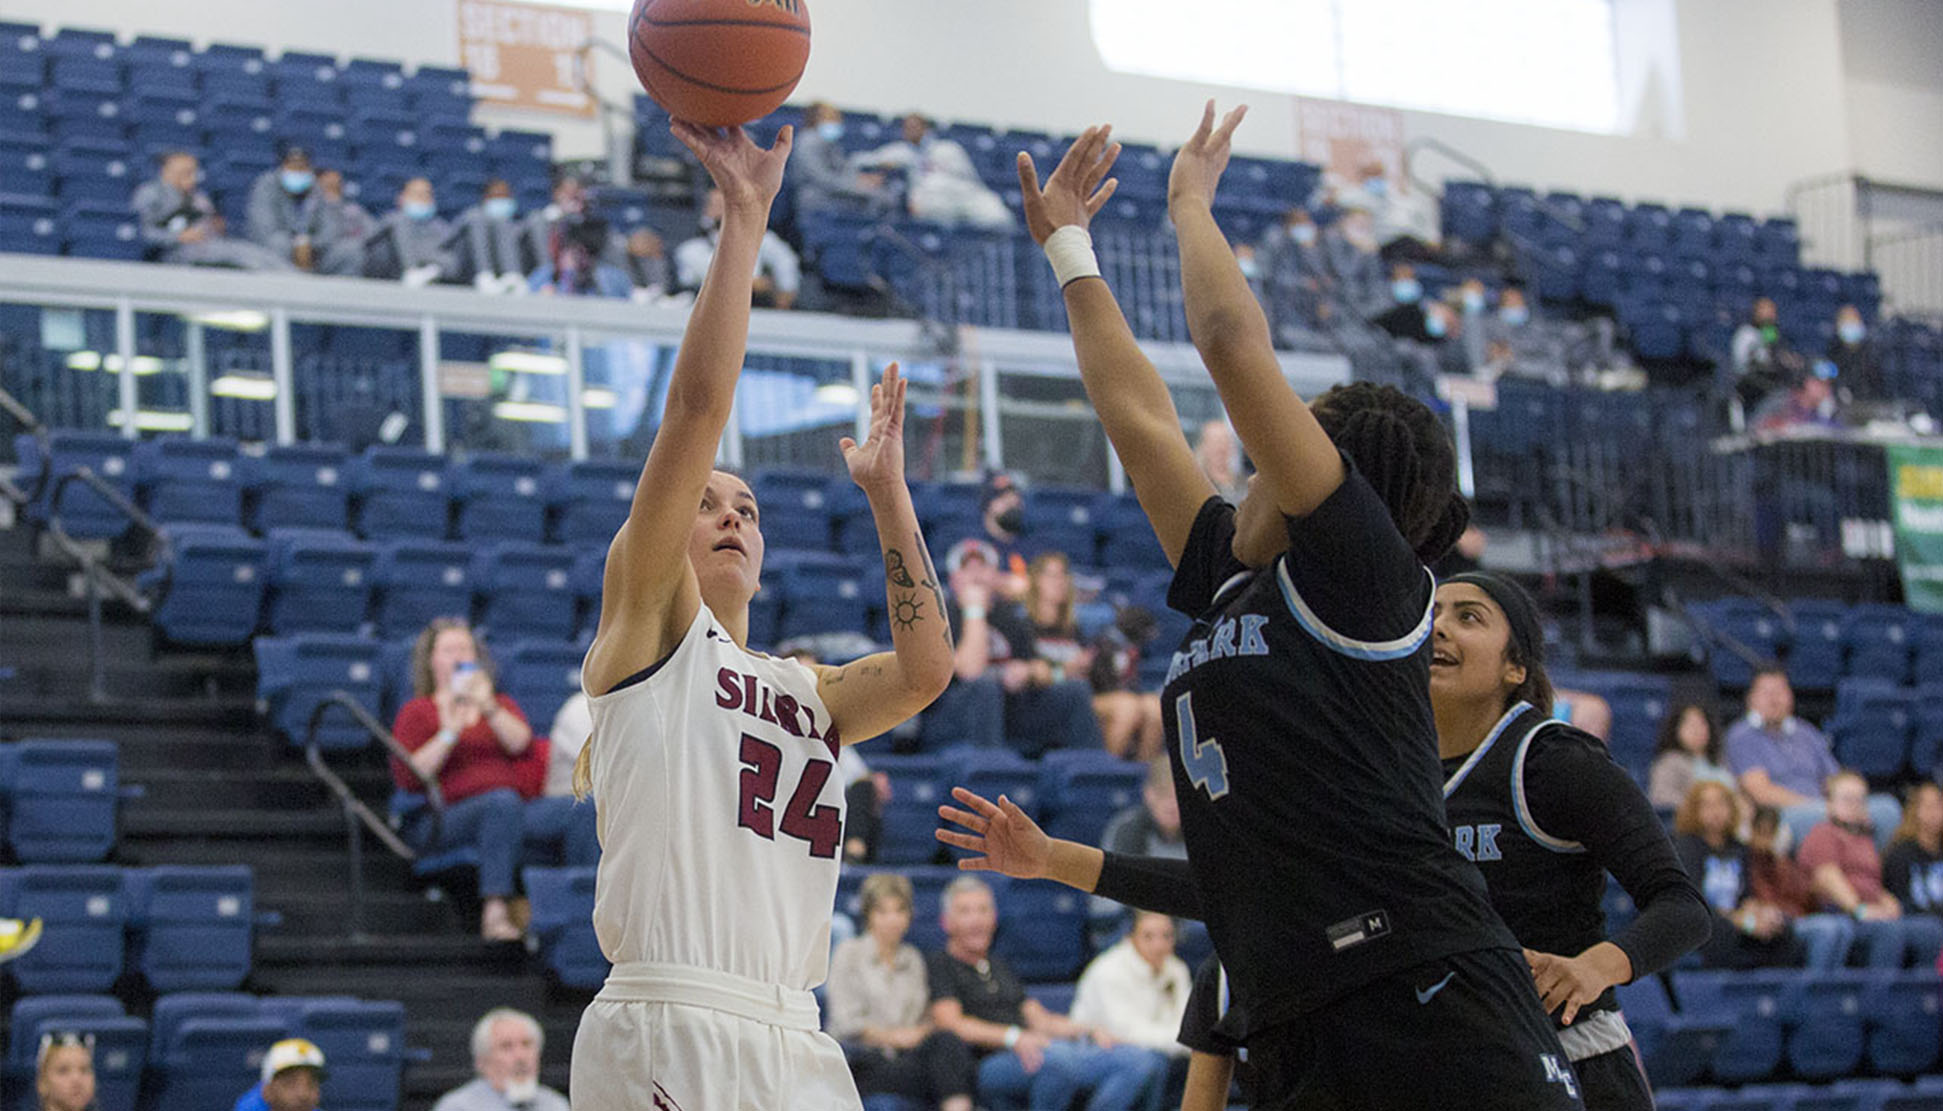 Women's Basketball Advance to State Semifinals with 83-53 Victory over COS